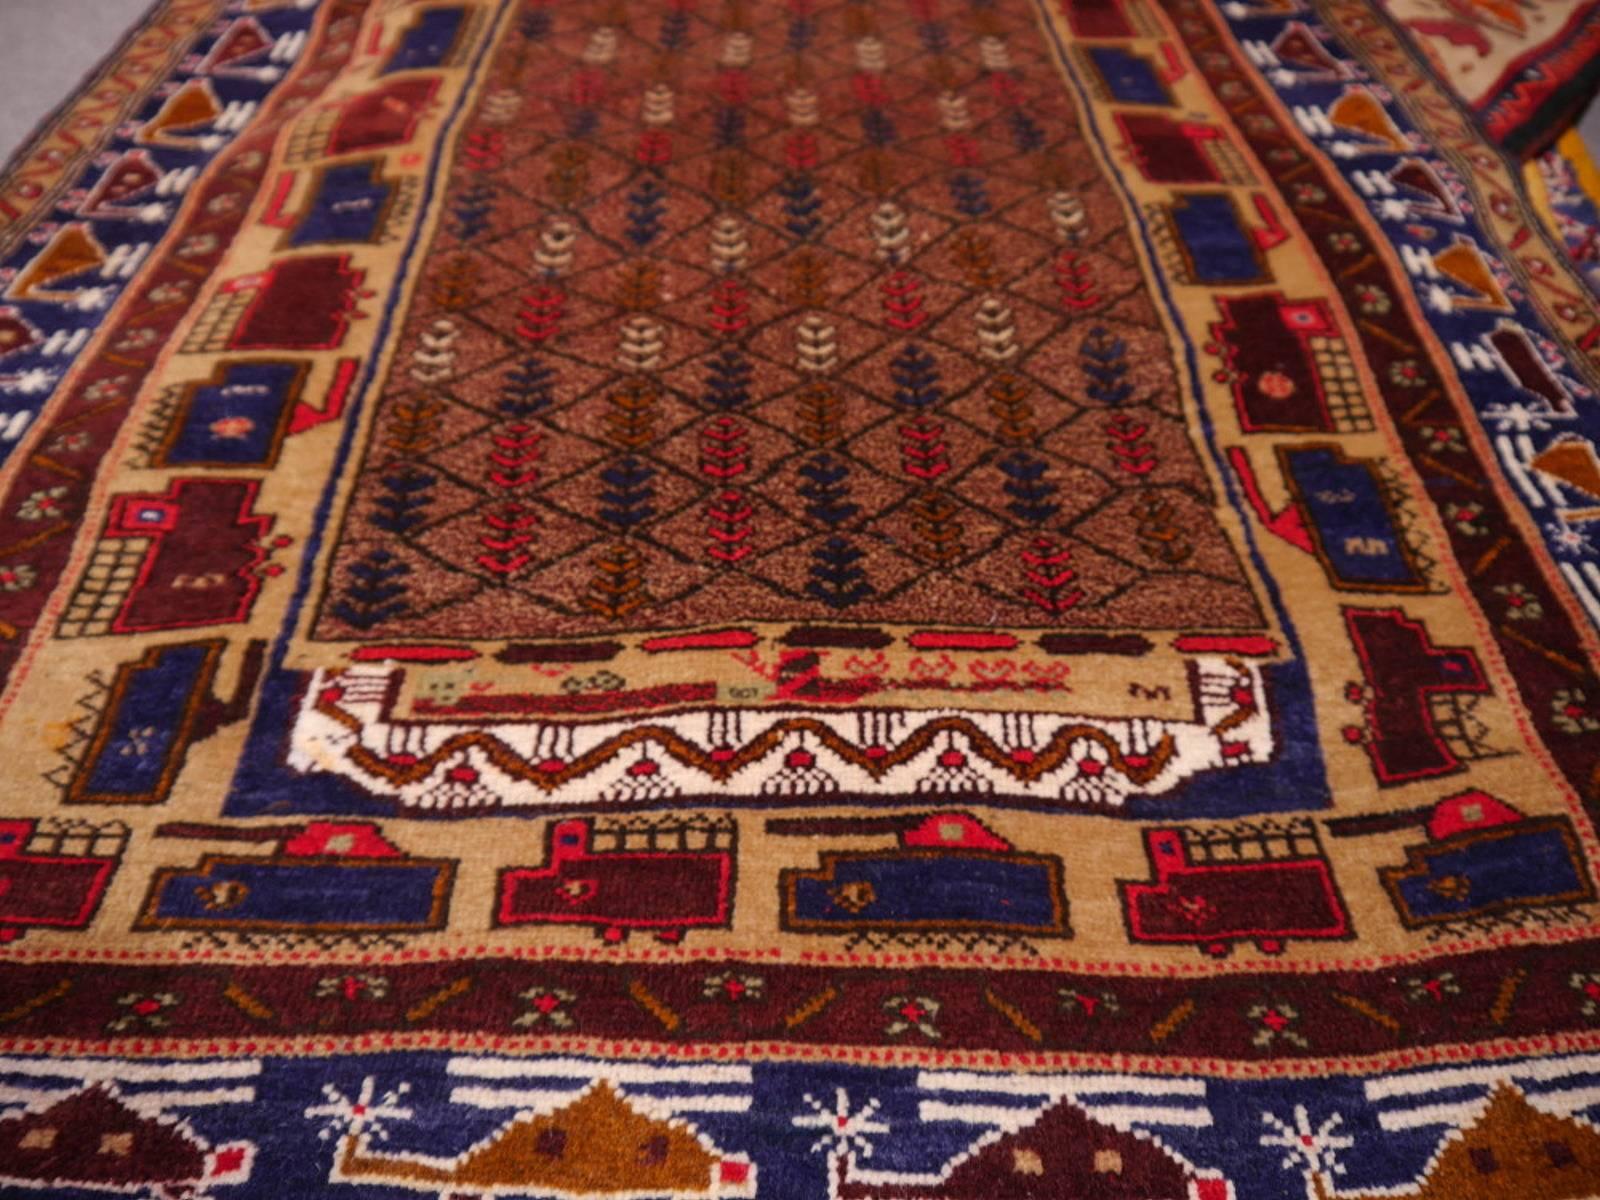 Tribal Vintage Afghan War Rug with Tanks and Helicopters